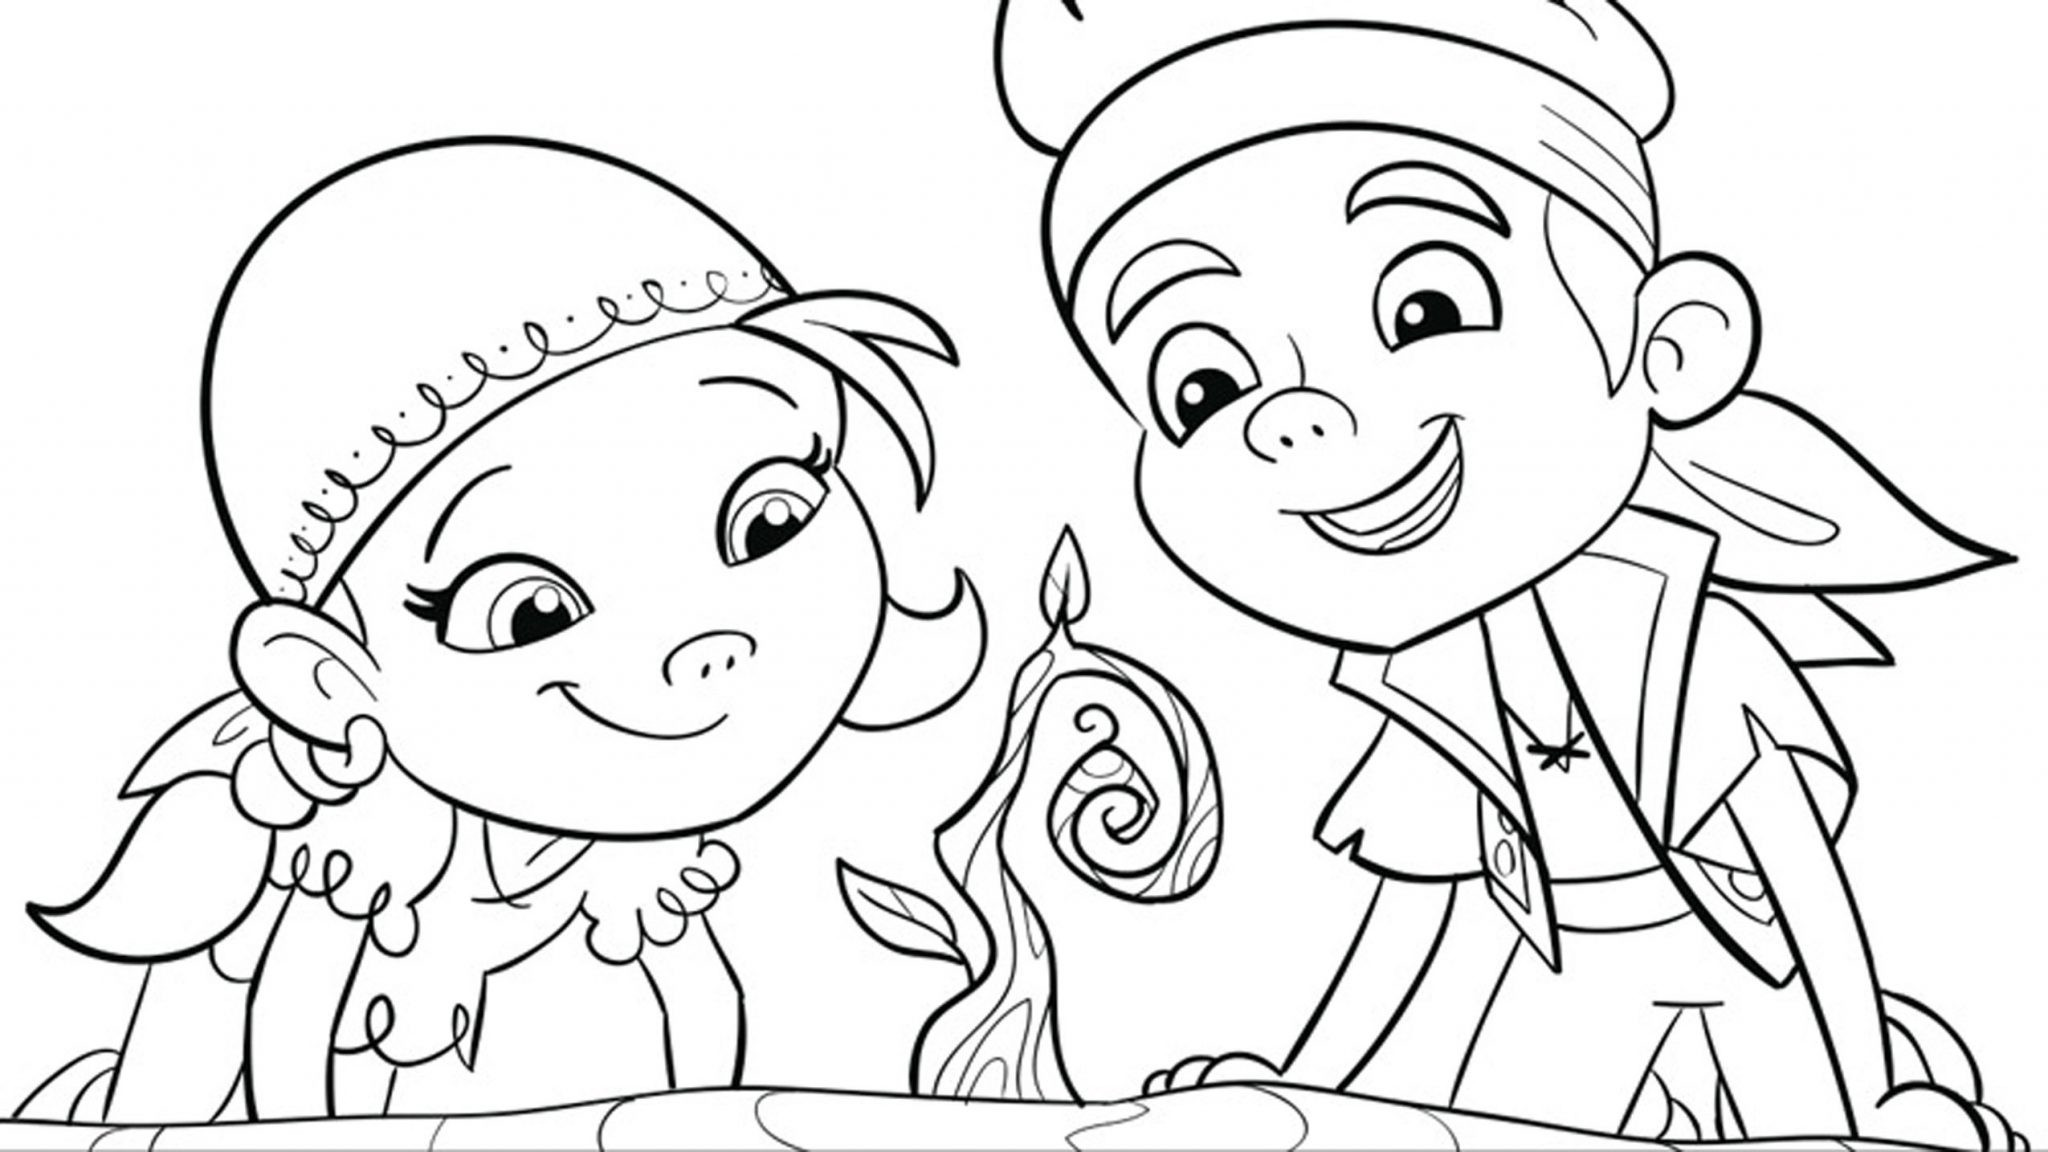 Printable Disney Coloring Pages
 33 Free Disney Coloring Pages for Kids